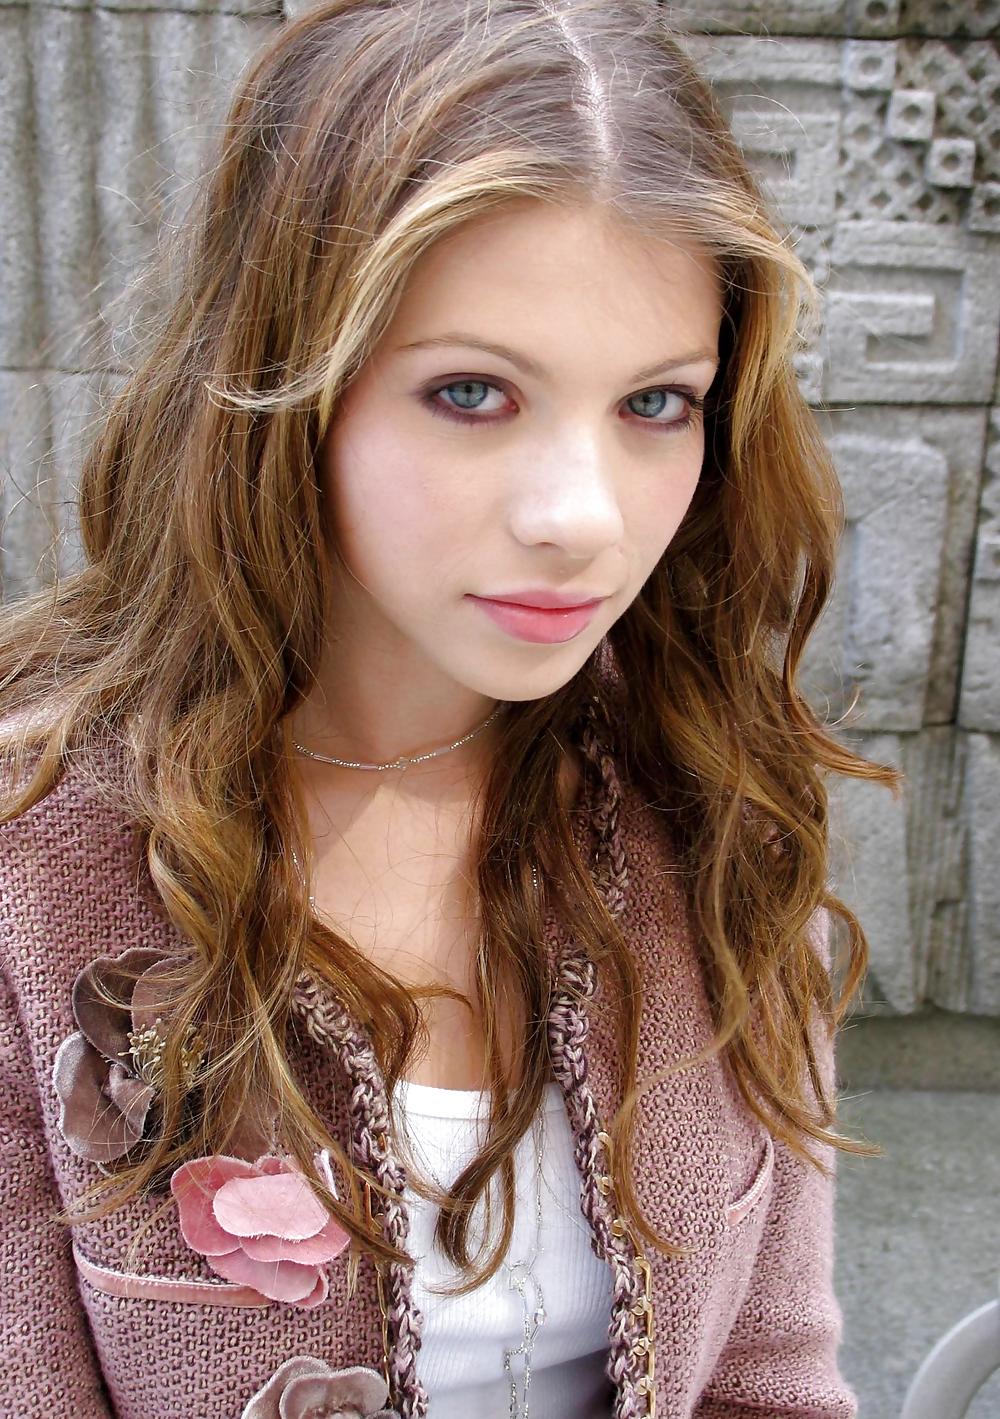 Michelle Trachtenberg - I'd Sell My Soul to Fuck Her Once #975213